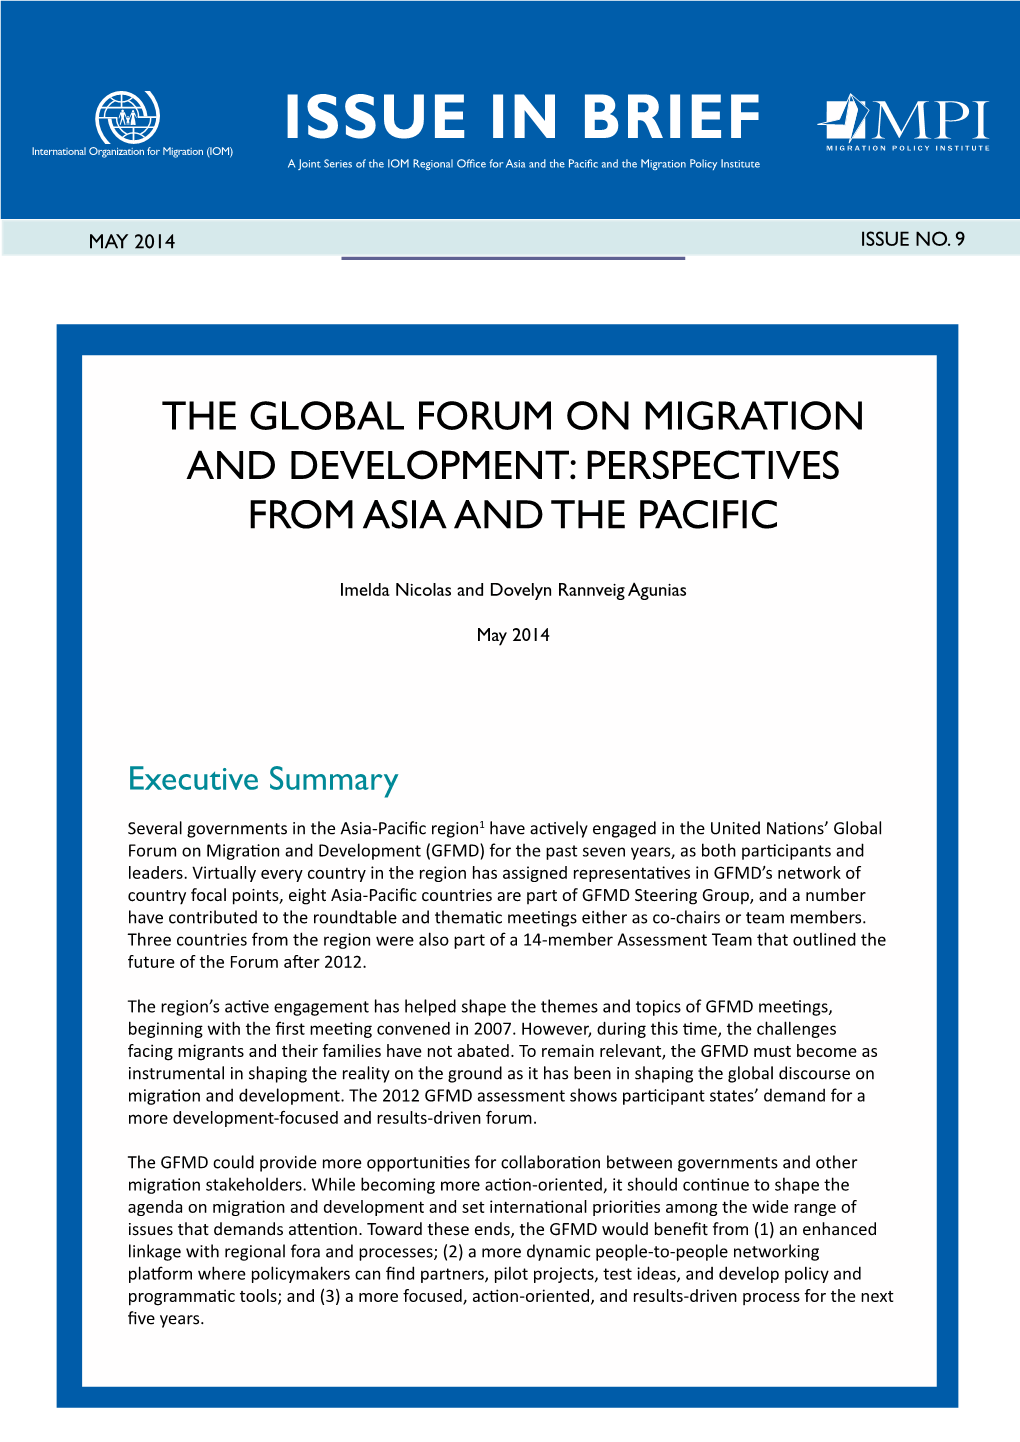 Issue in Brief a Joint Series of the IOM Regional Office for Asia and the Pacific and the Migration Policy Institute